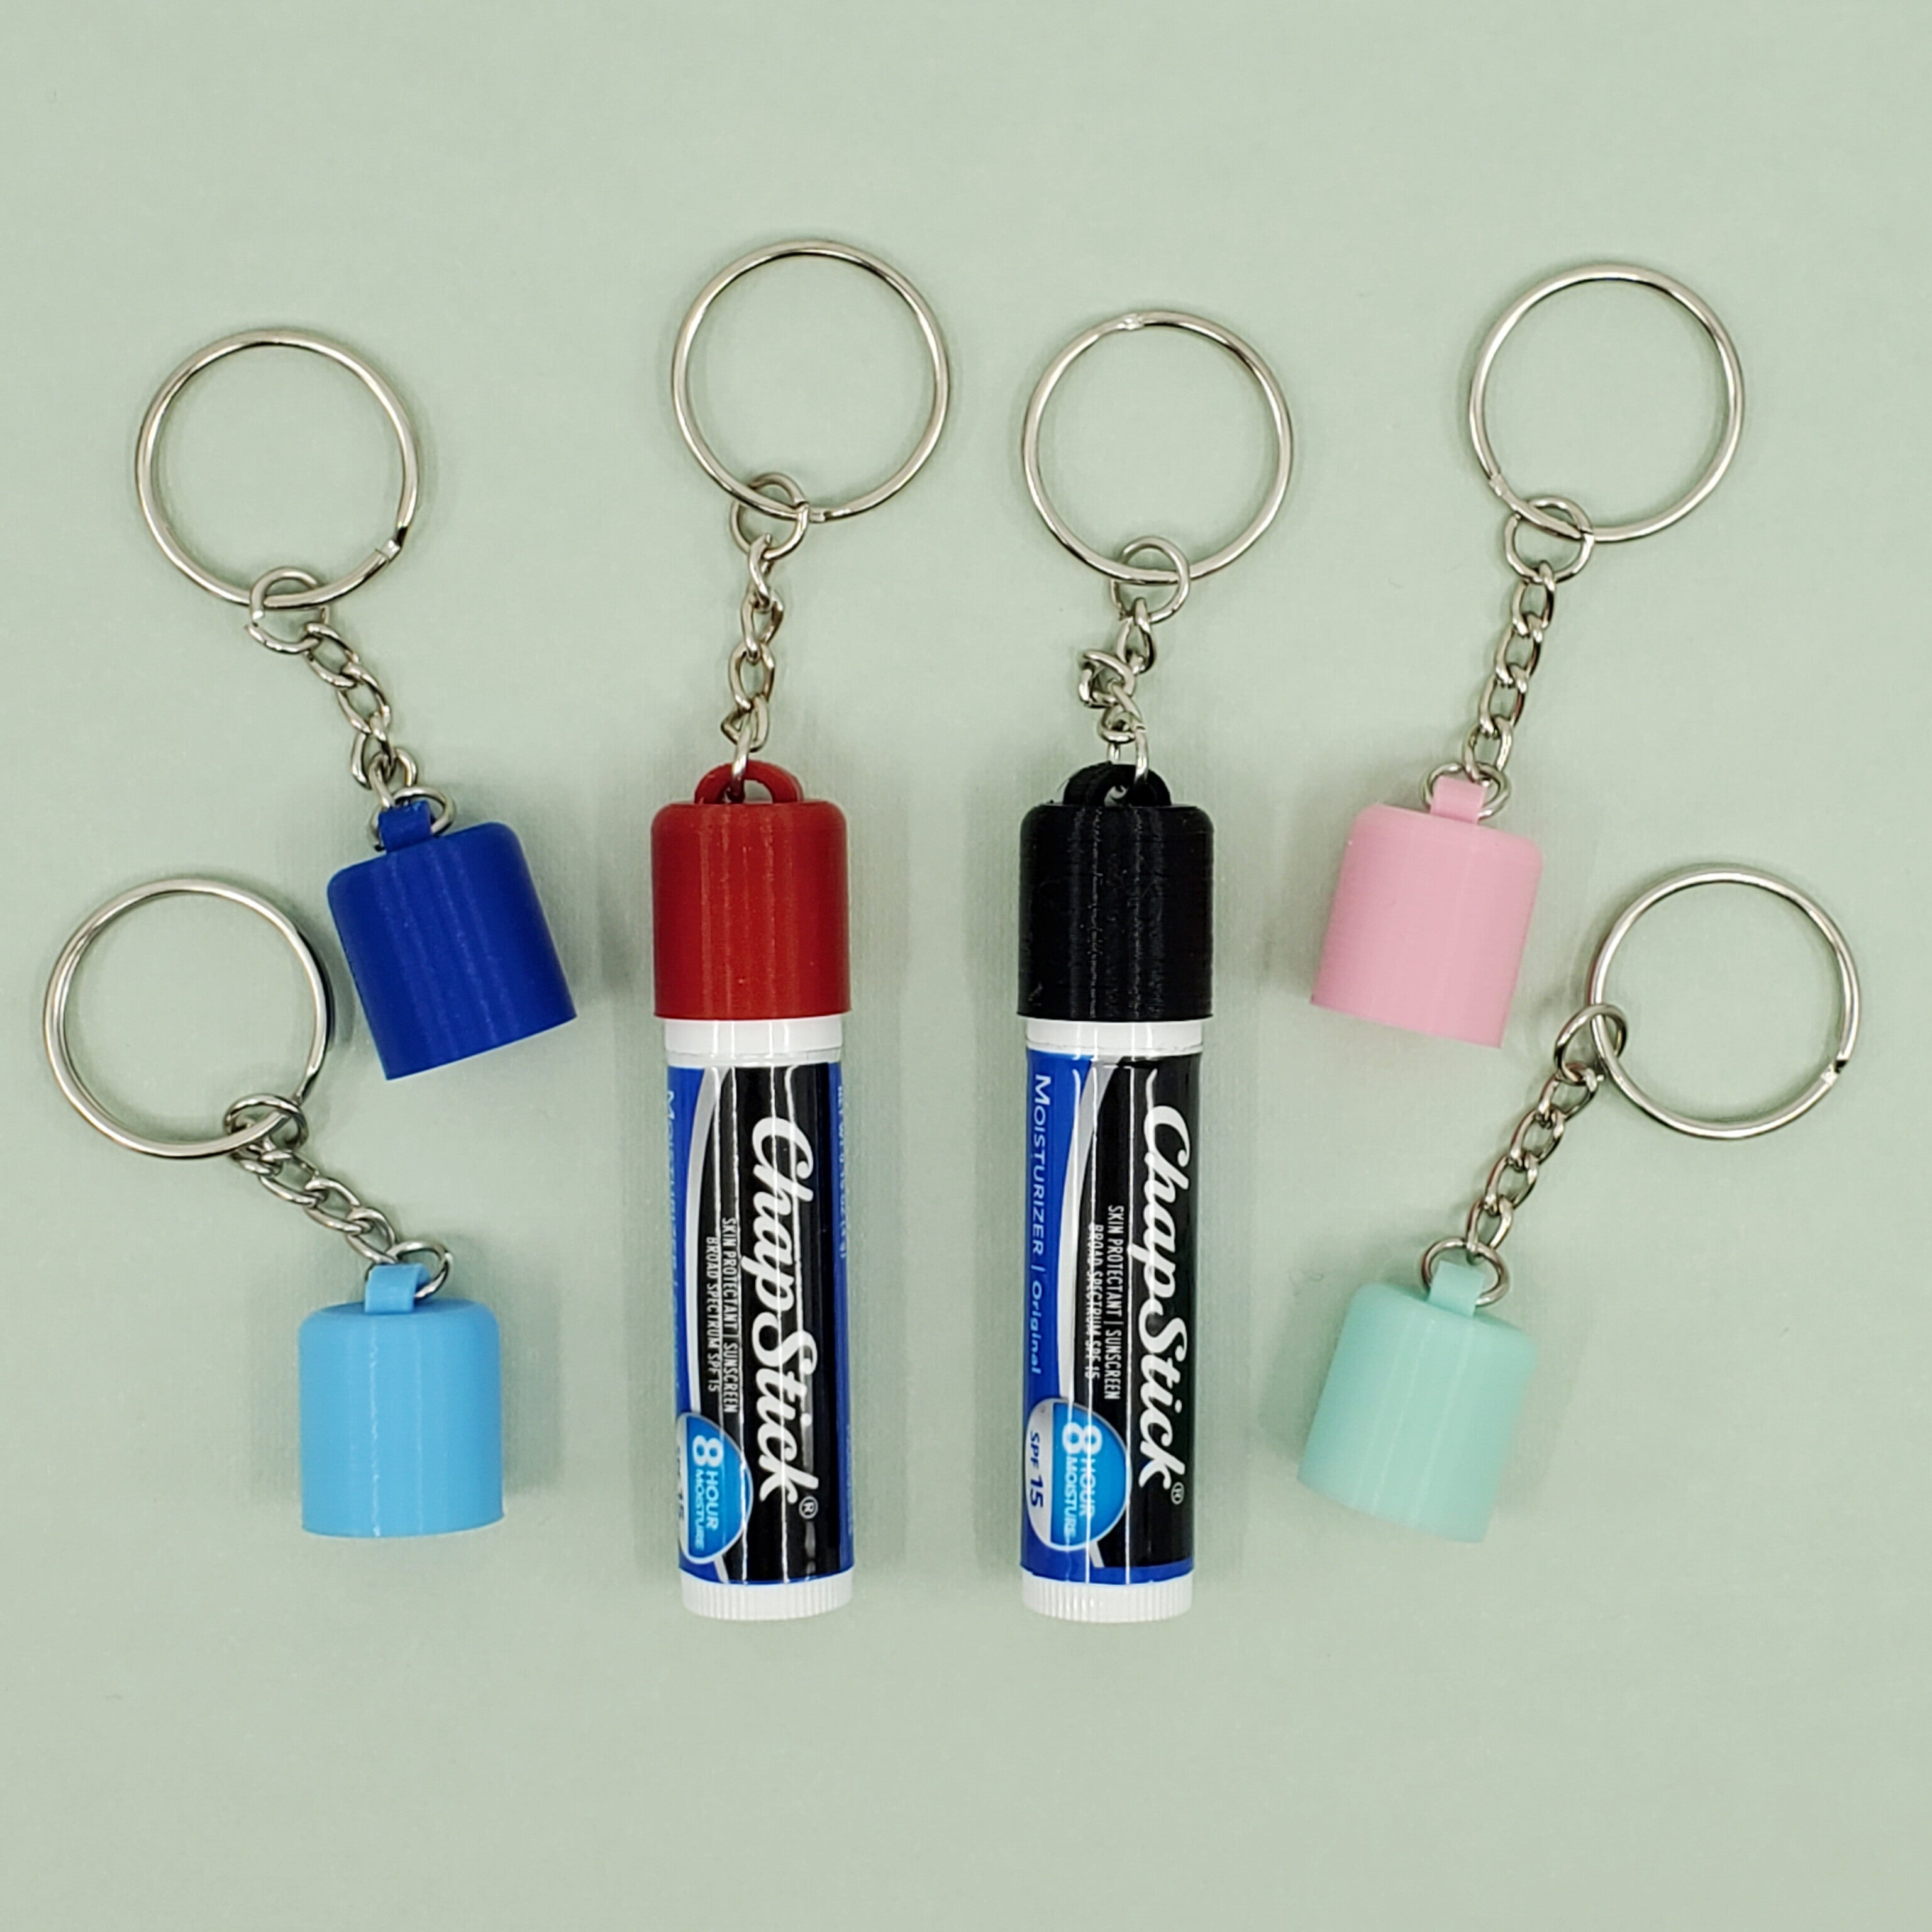 ChapStick Cap Cover Keychains (Set of 2 or 4)